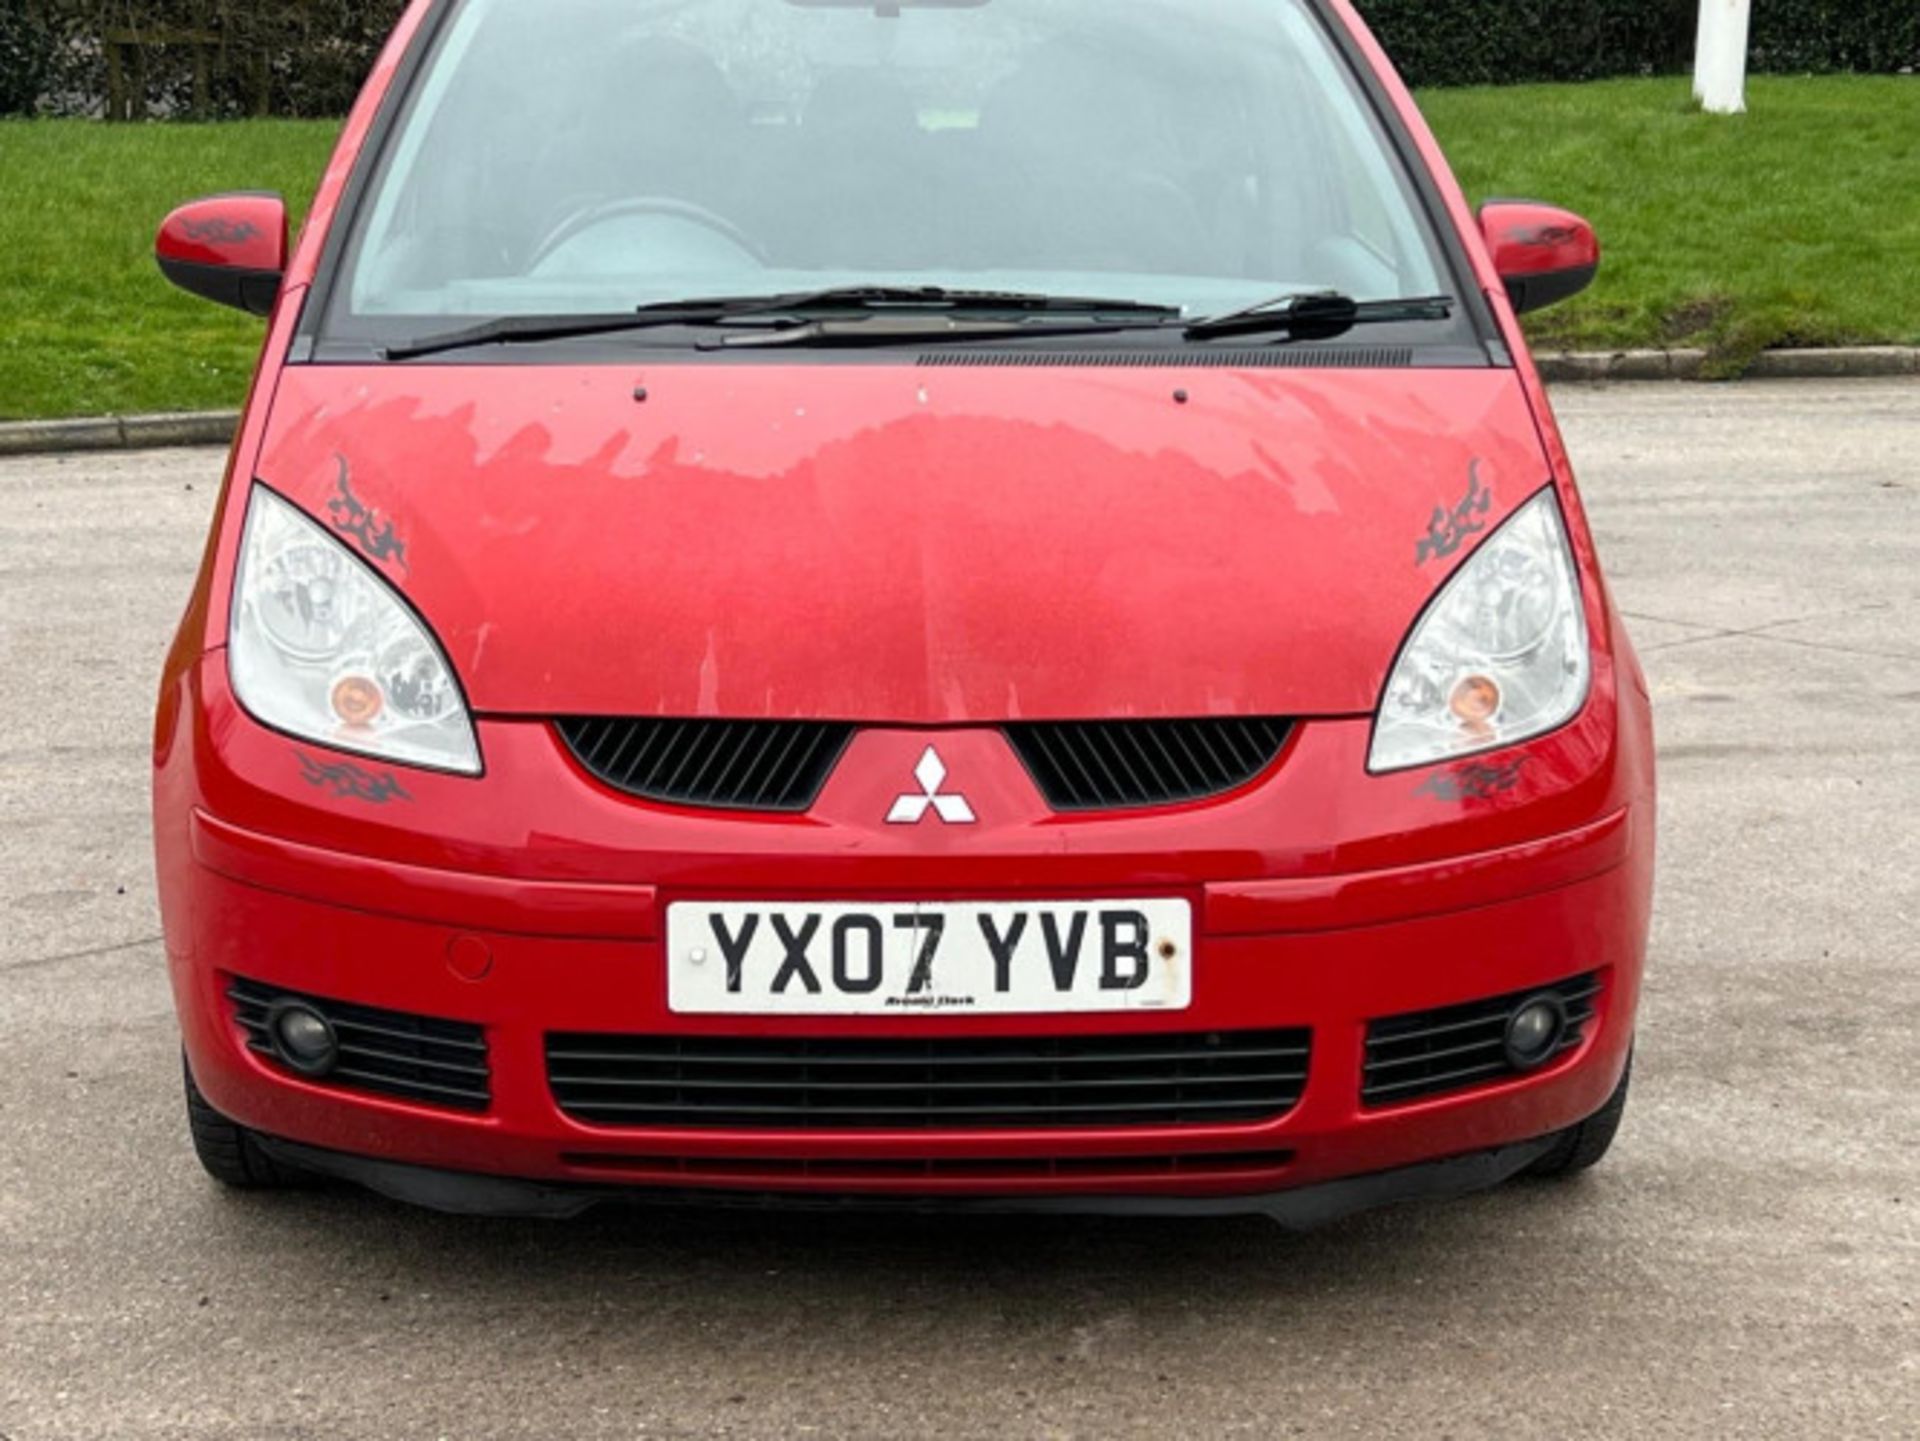 2007 MITSUBISHI COLT 1.5 DI-D DIESEL AUTOMATIC >>--NO VAT ON HAMMER--<< - Image 172 of 191